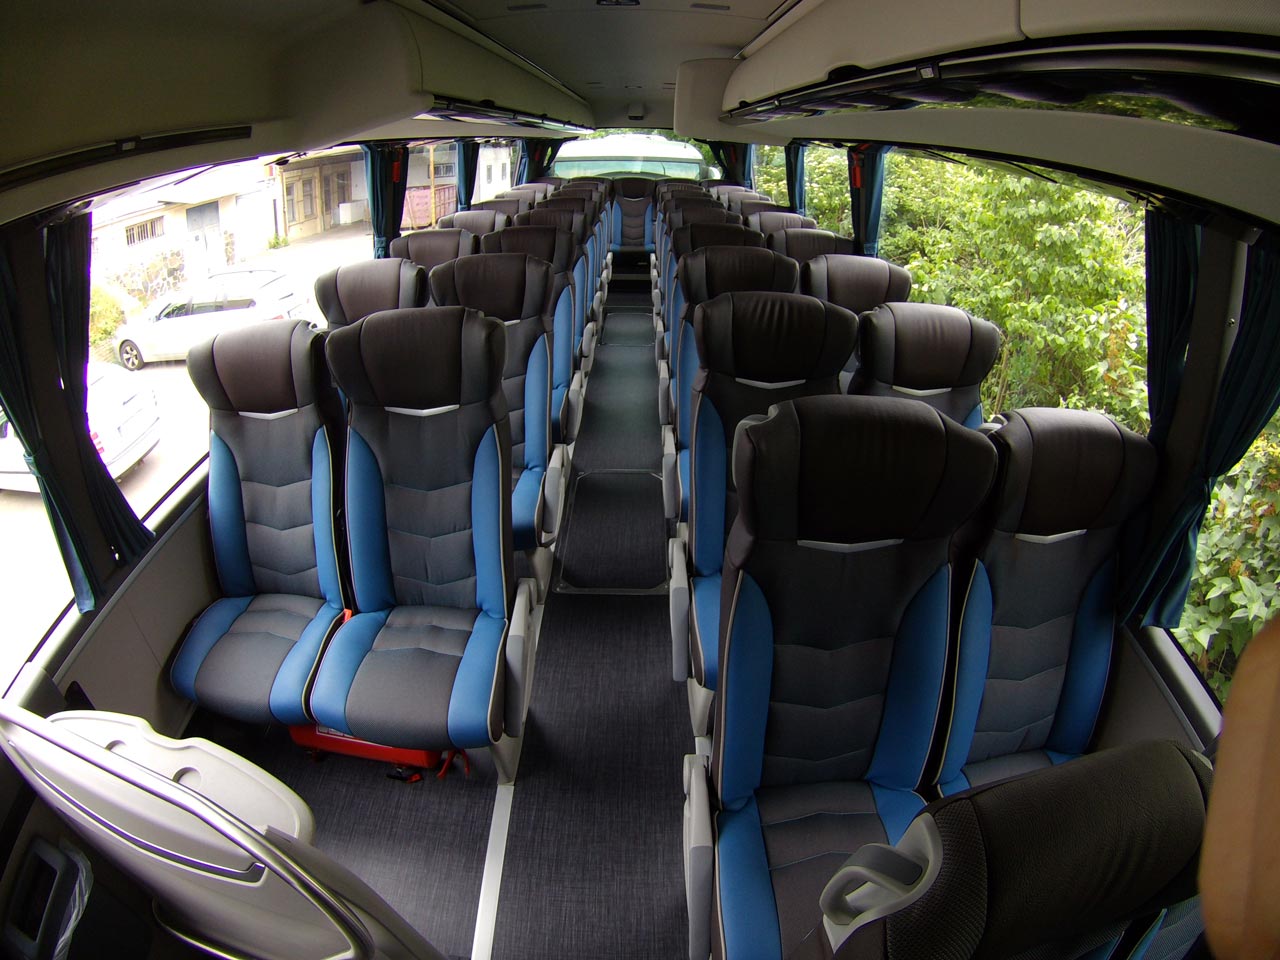 Thanks to the “seating programme” the coach operators has received nearly one billion crowns